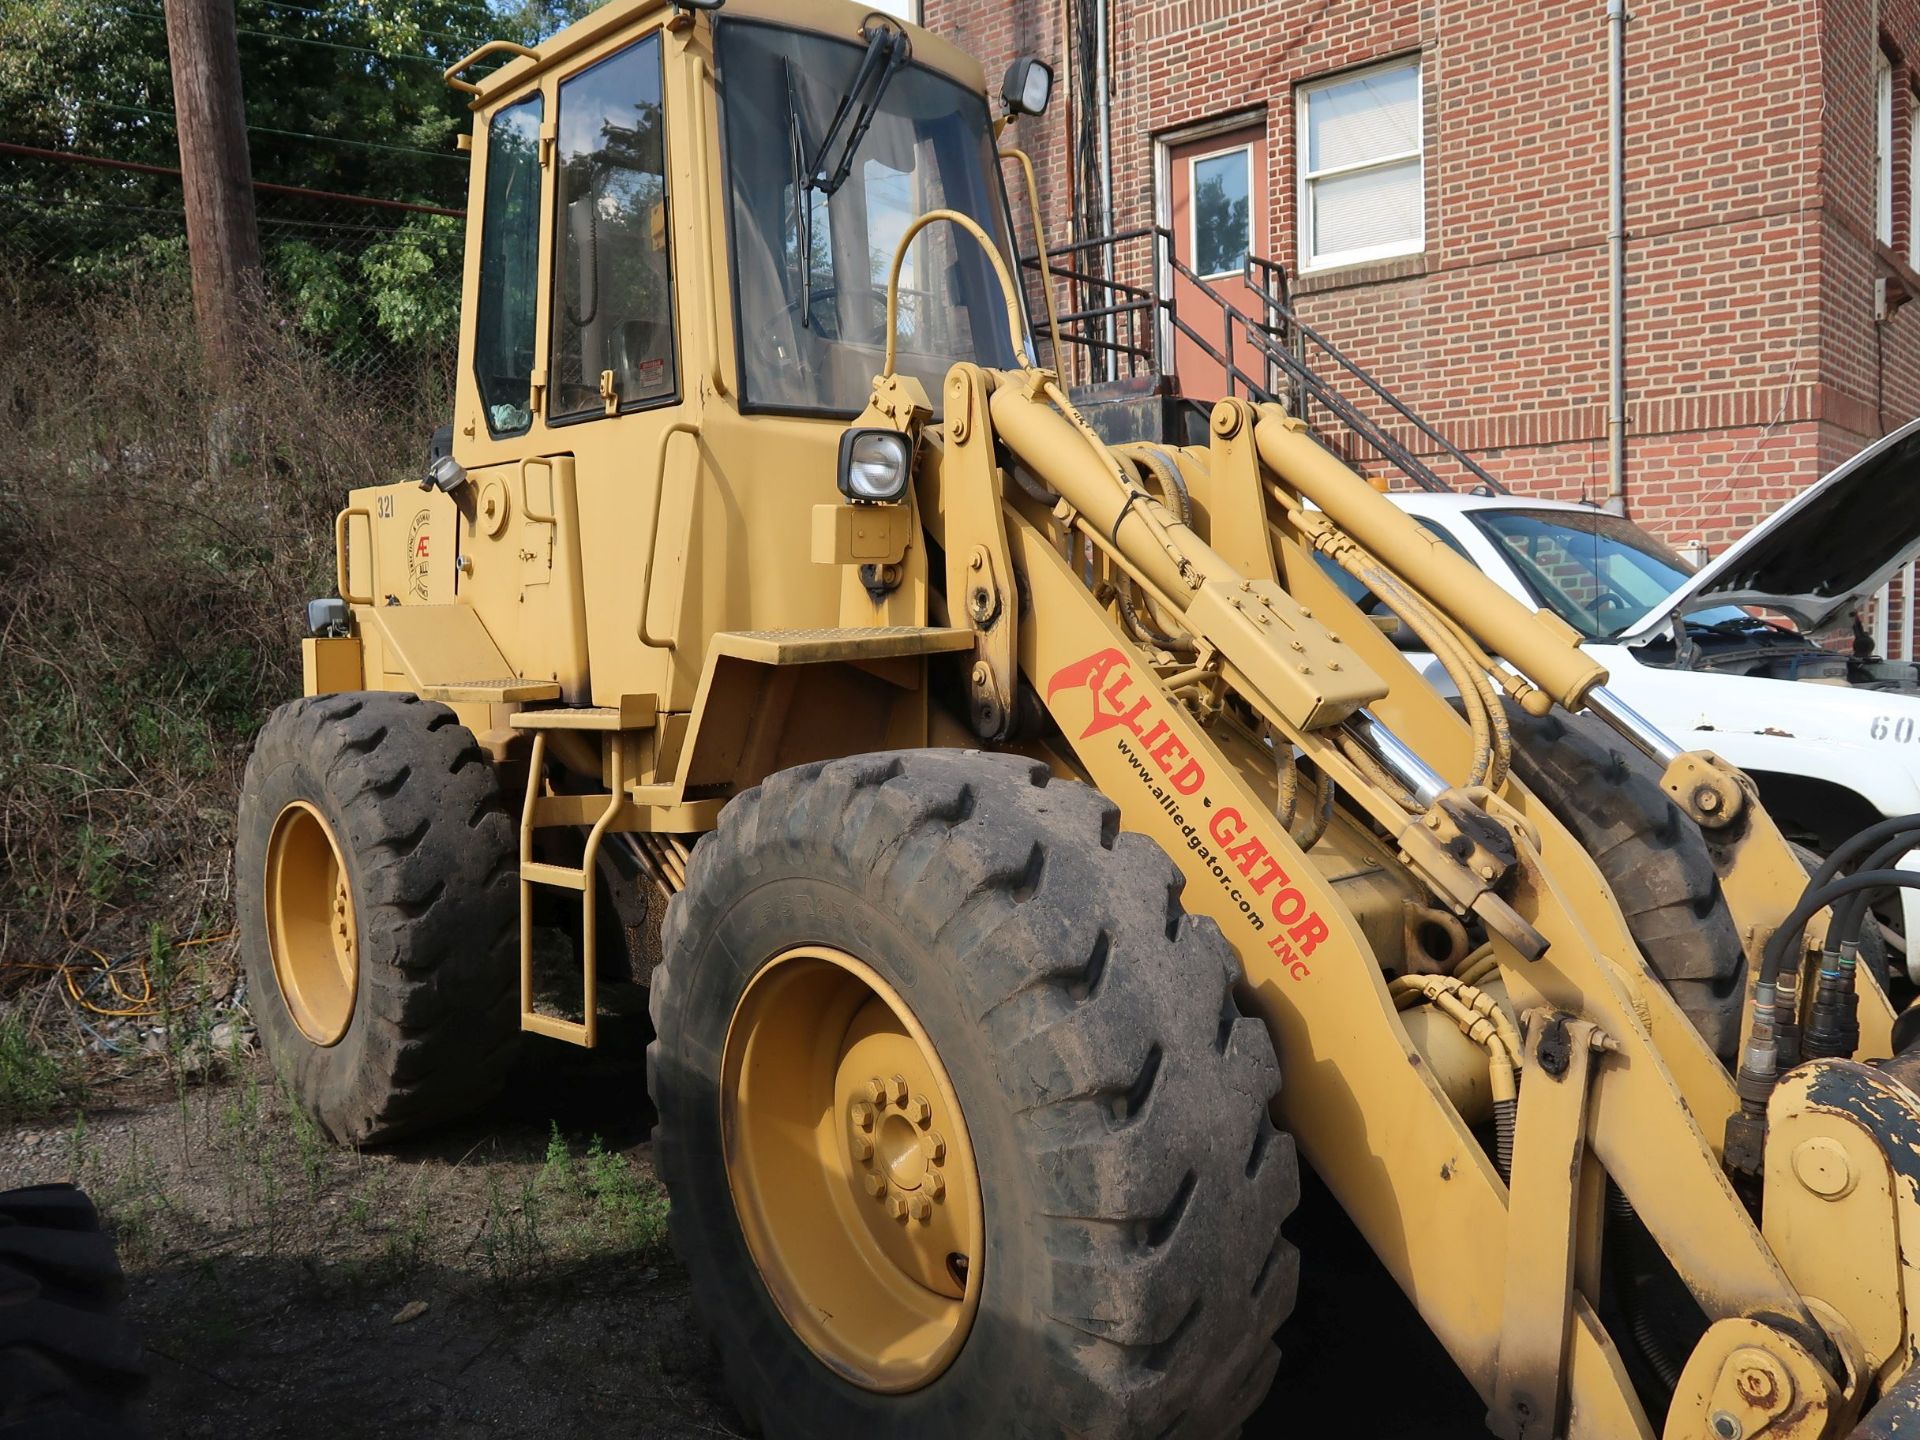 CATERPILLAR MODEL IT14B RUBBER TIRE LOADER; S/N 3NJ00060, 21,804 HOURS, WITH ROTATING FORK - Image 4 of 9